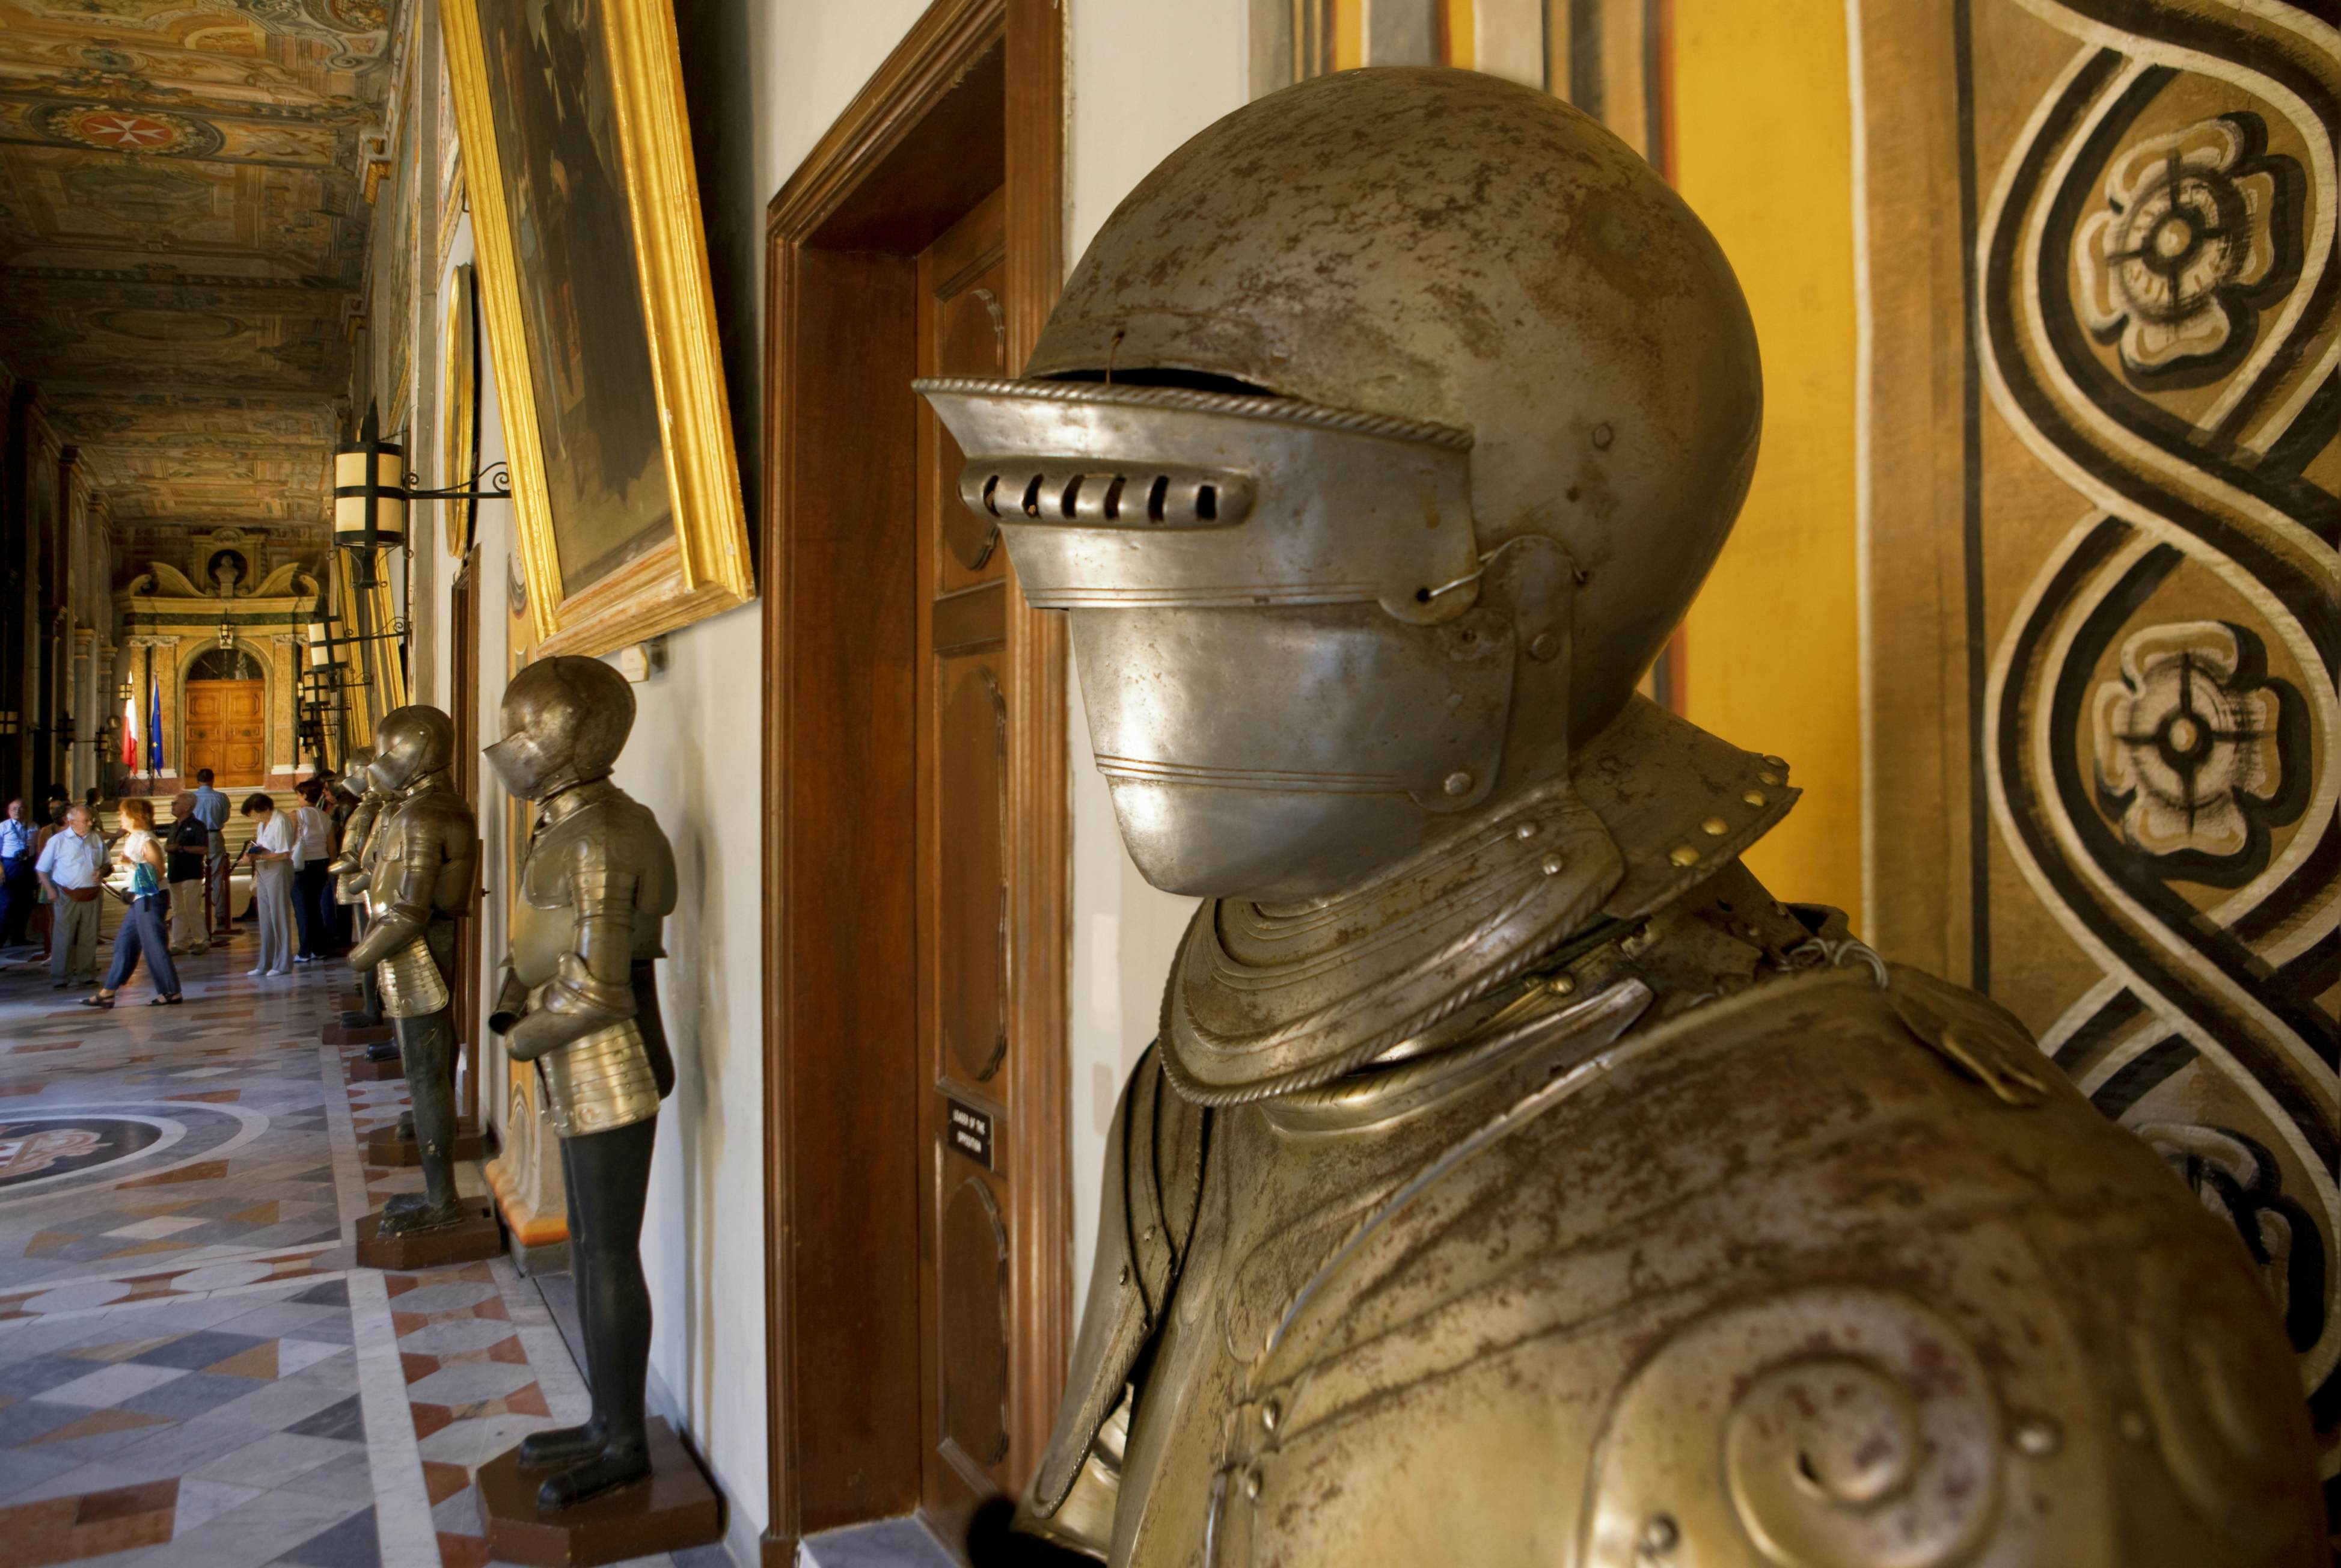 Grand Master's Palace - Review of Palace Armoury, Valletta, Malta